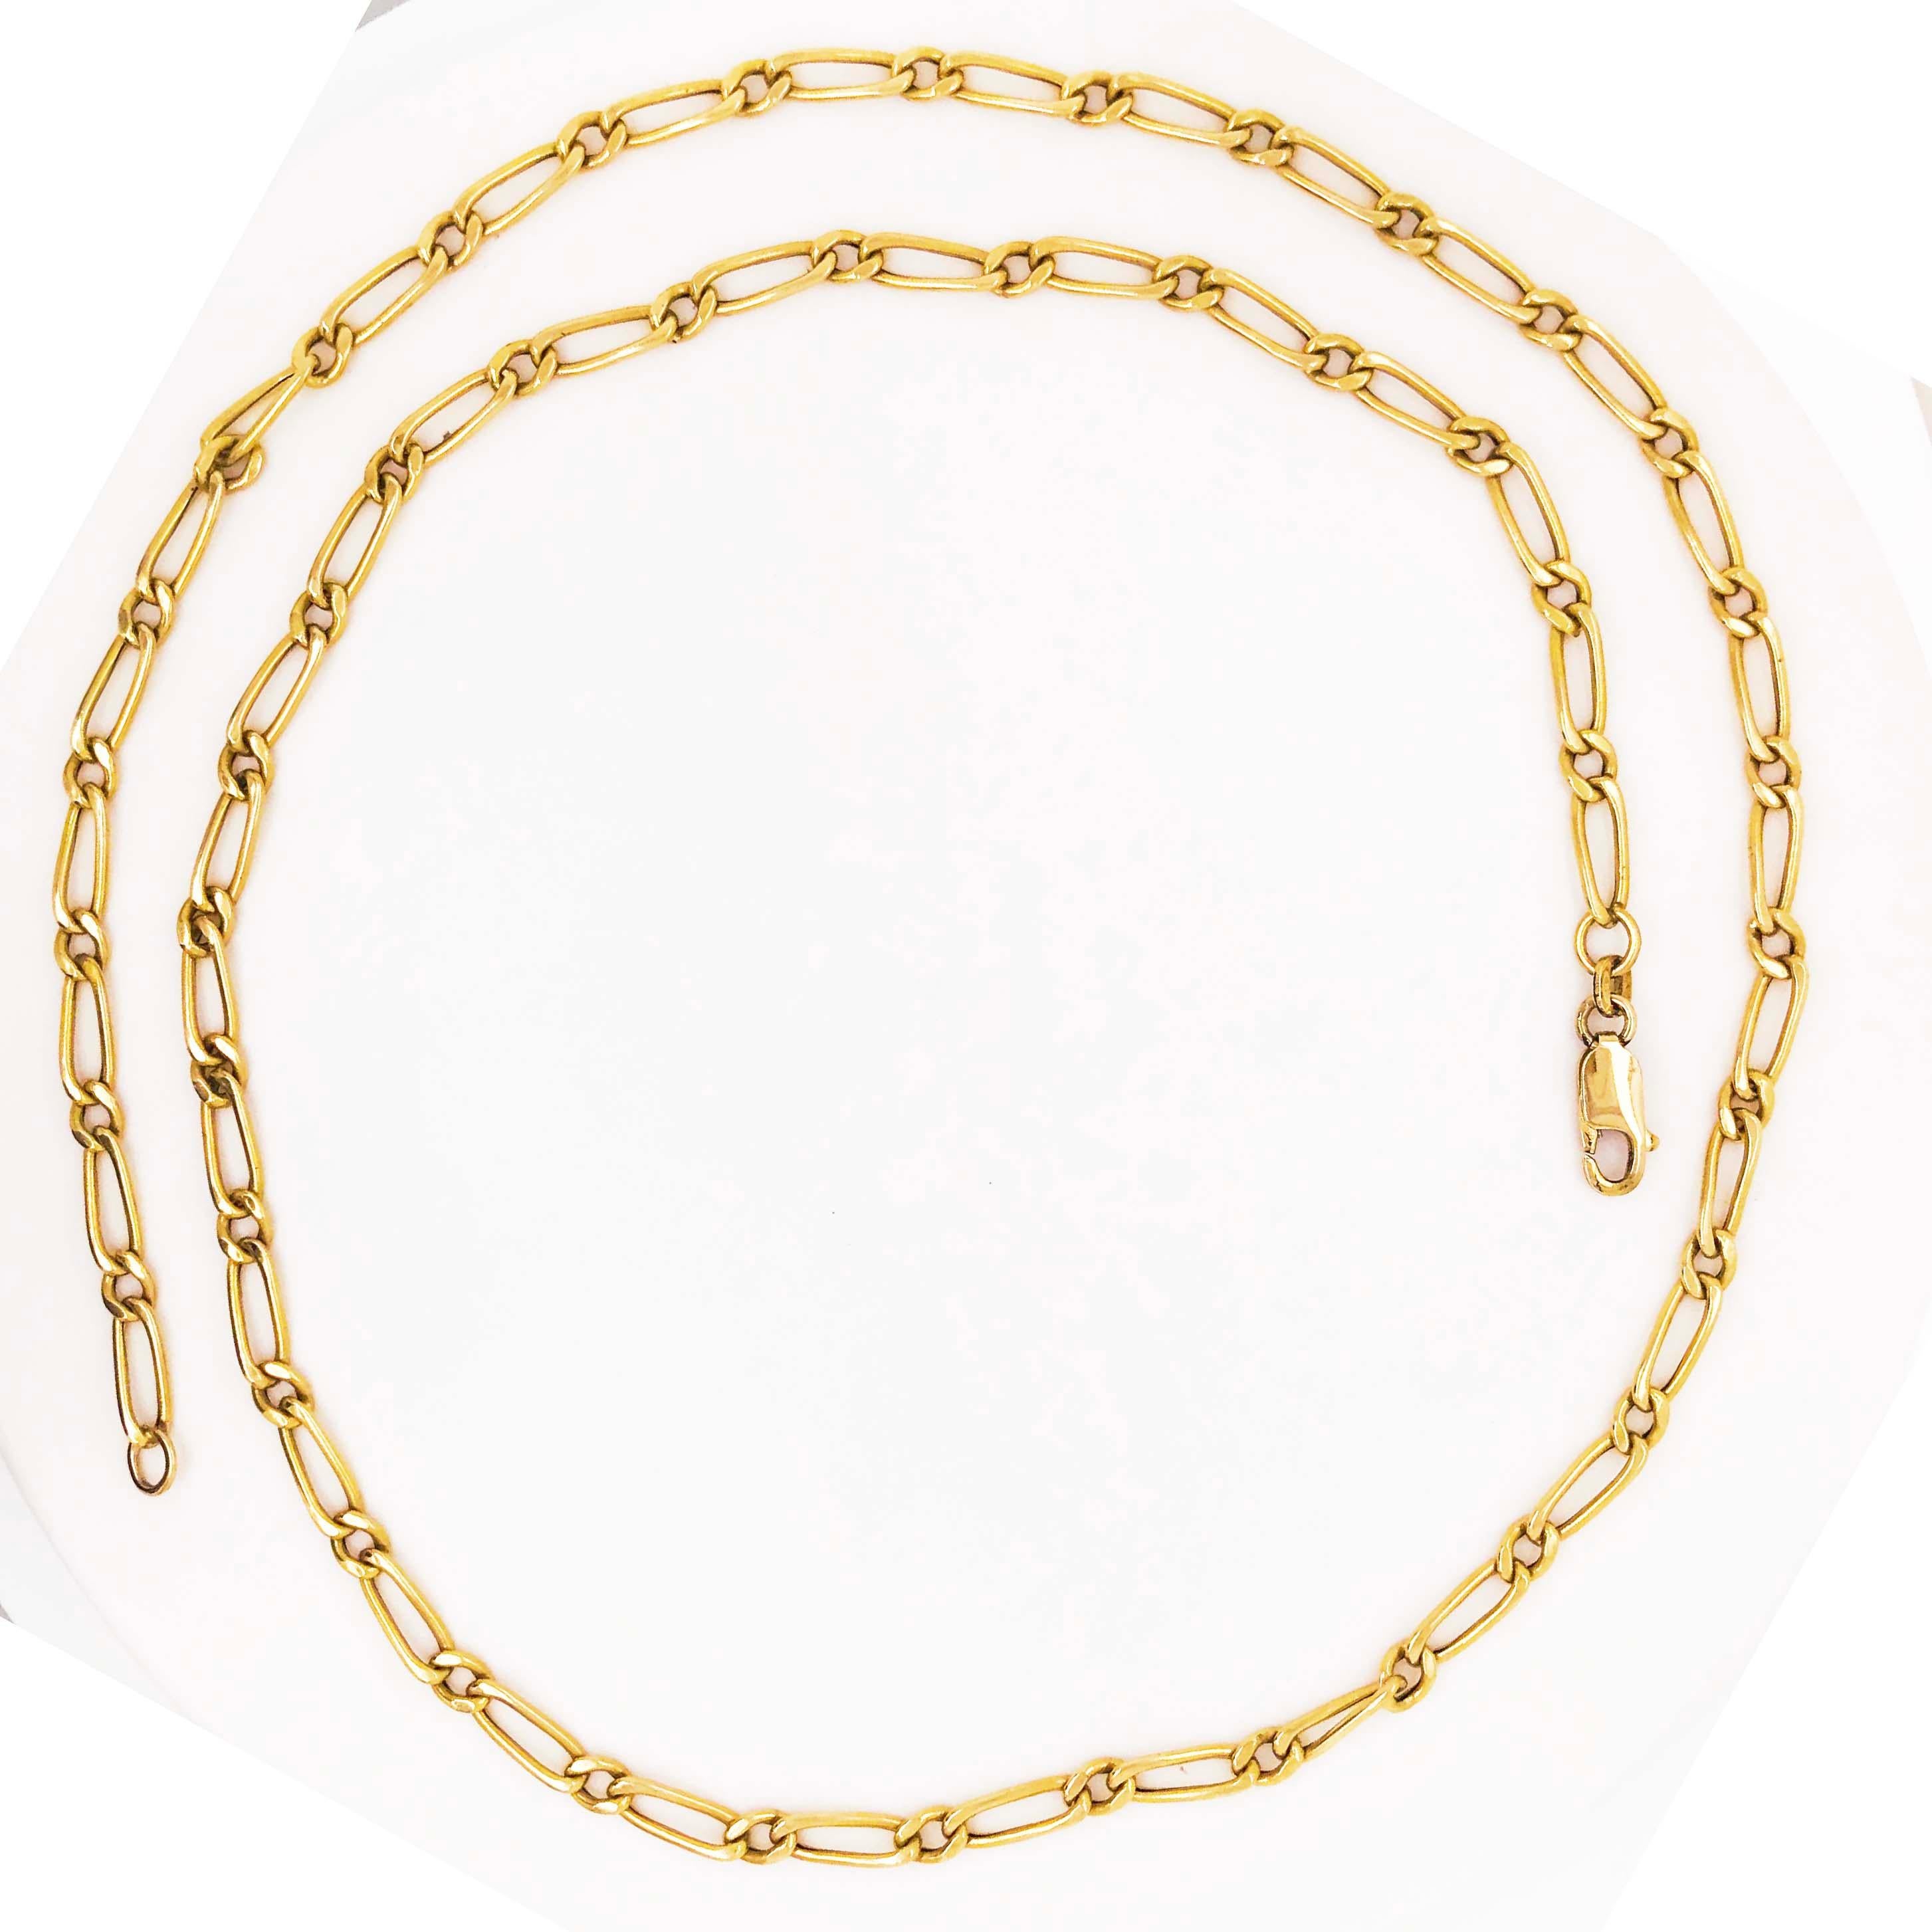 The CIRCA 1995 gold link chain has handmade links made in precious metal, 14 karat yellow gold. The chain has a figaro link pattern that has a classic, timeless look. Figaro chains have been a fashion chain for generations, they are a staple in